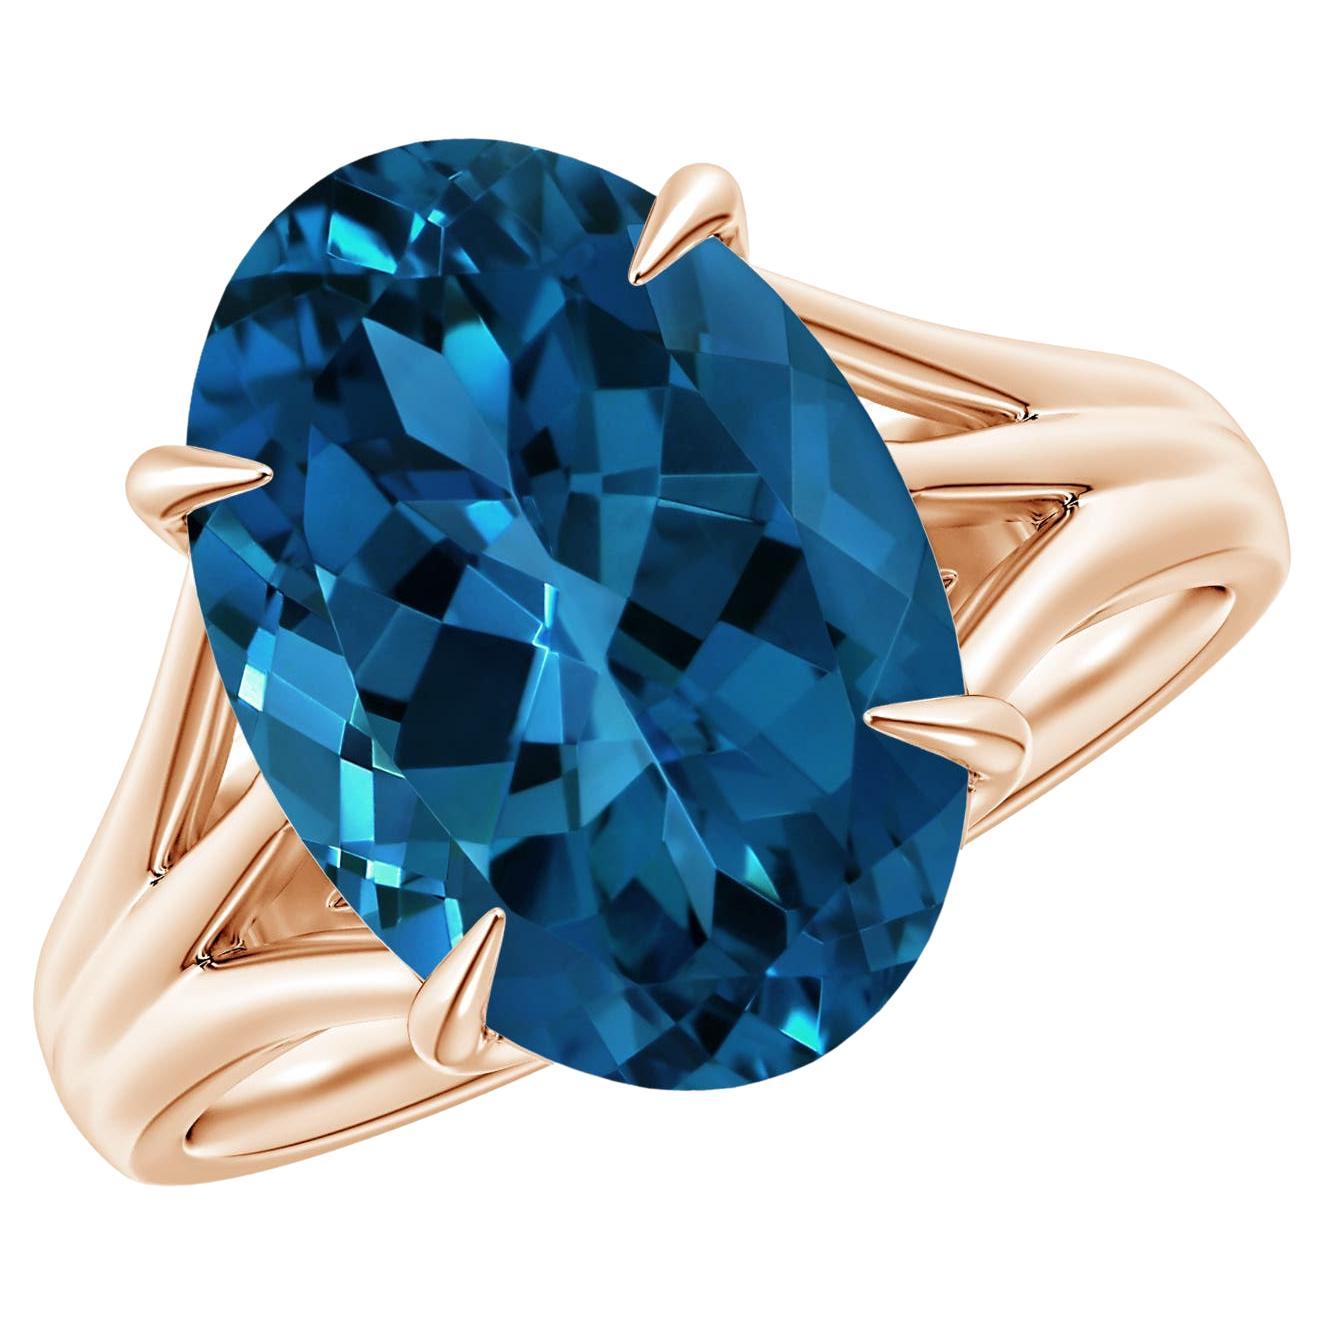 For Sale:  Angara GIA Certified Natural London Blue Topaz Engagement Ring in Rose Gold